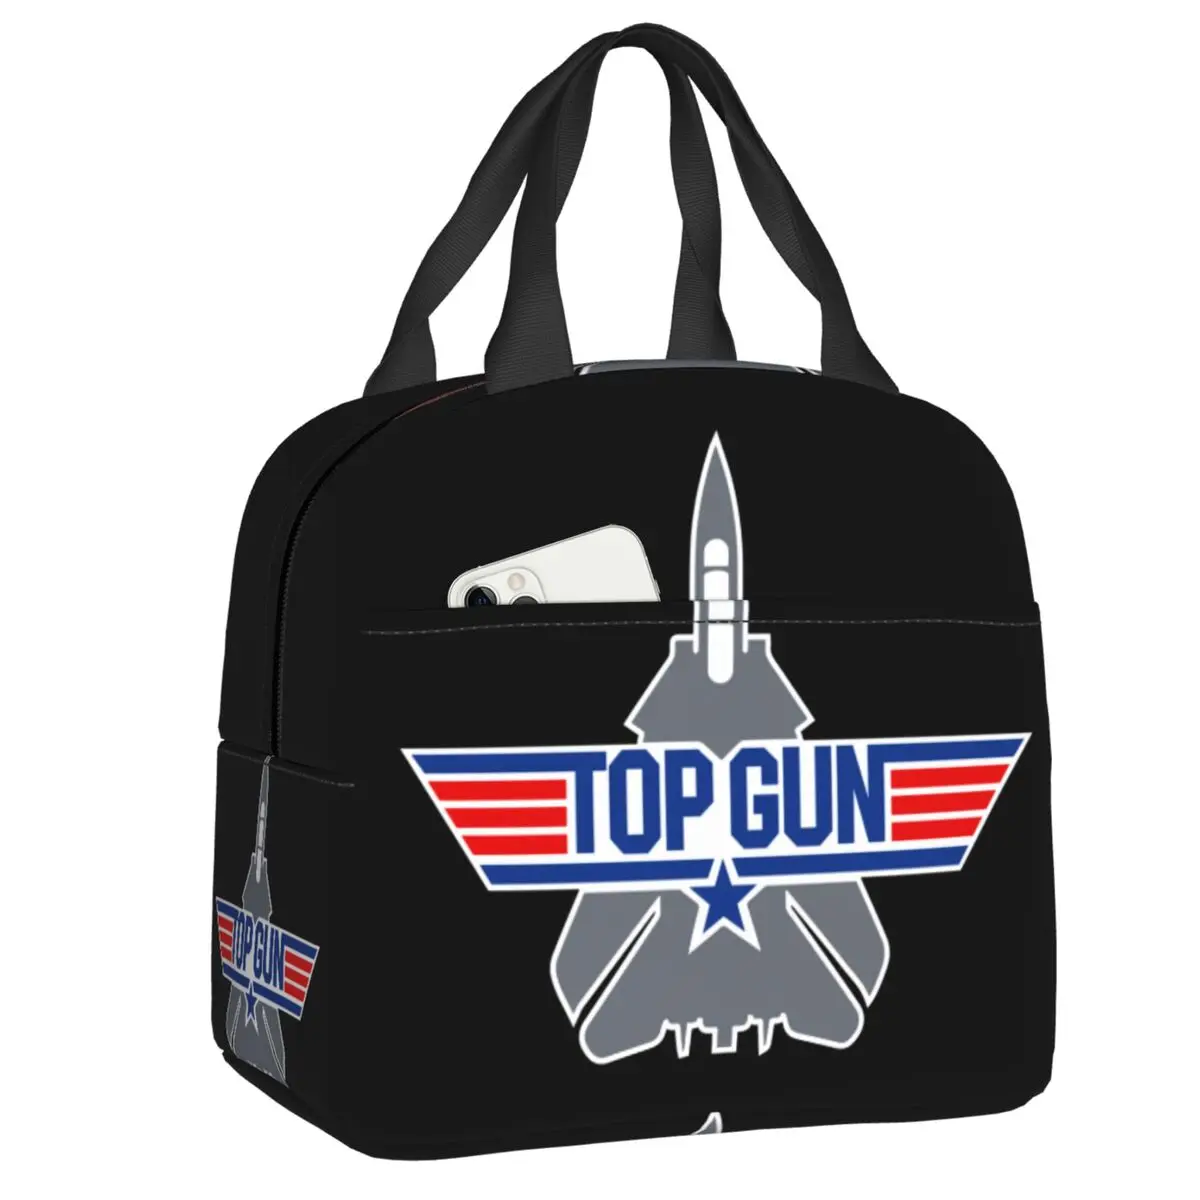 

Fighter Jets Top Gun Resuable Lunch Box for Women Maverick Tom Cruise Film Thermal Cooler Food Insulated Lunch Bag Office Work